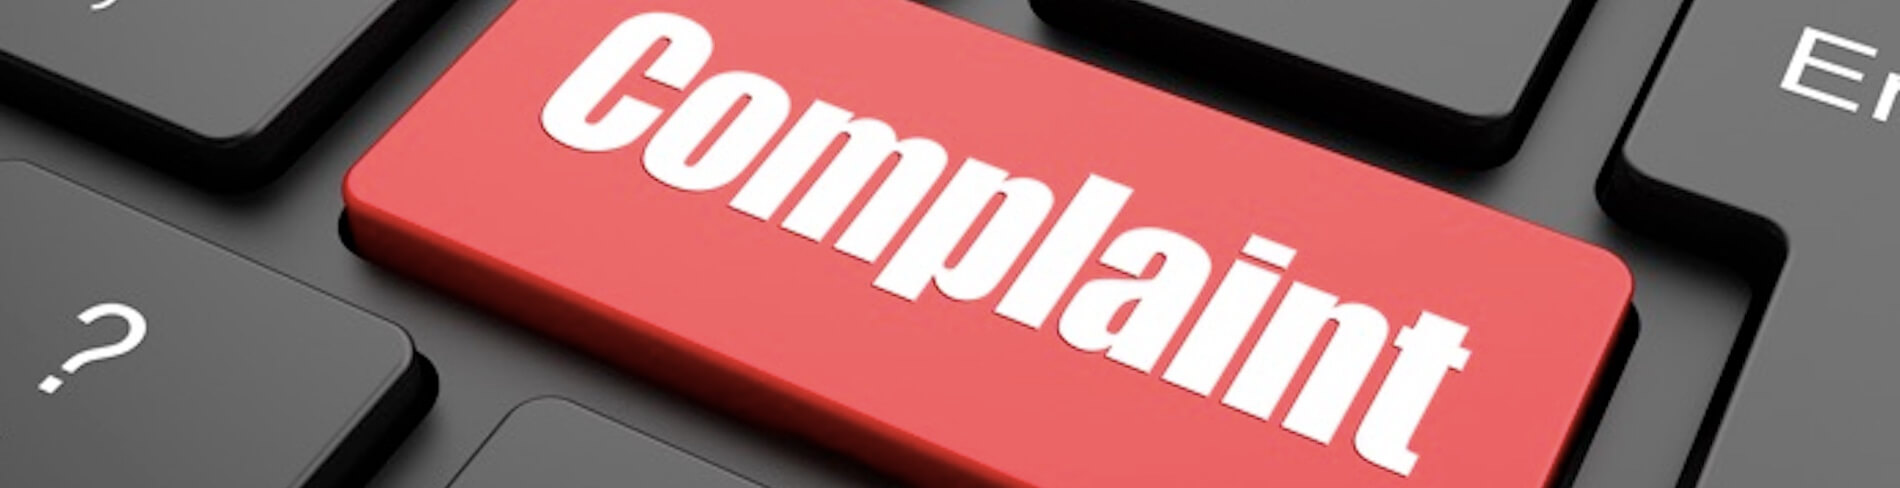 How To File a Casino Complaint